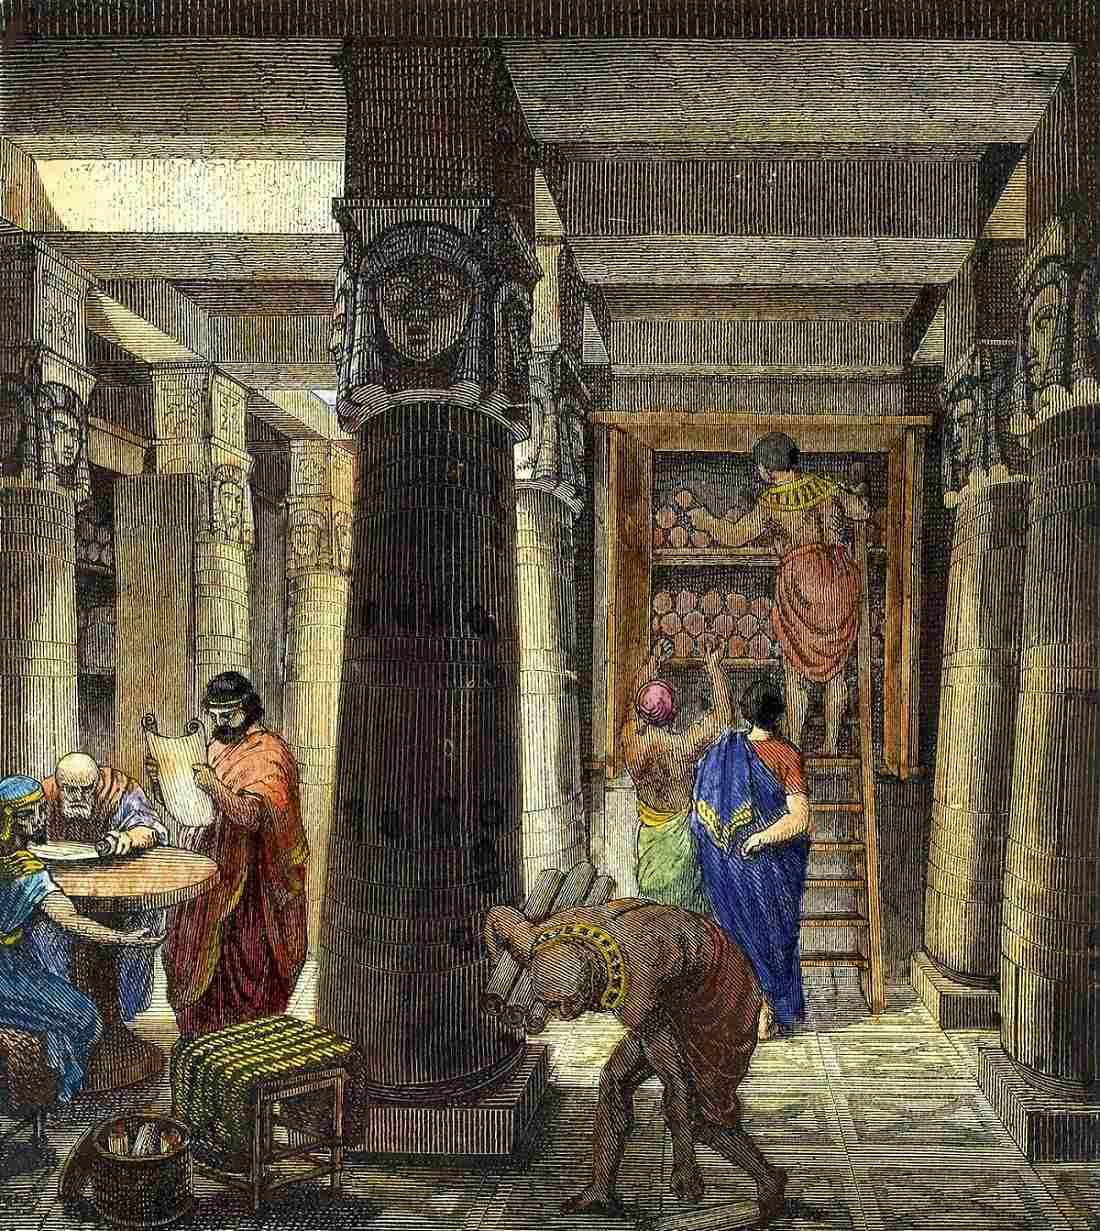 The Library of Ashurbanipal: The oldest known library that inspired the Library of Alexandria 2